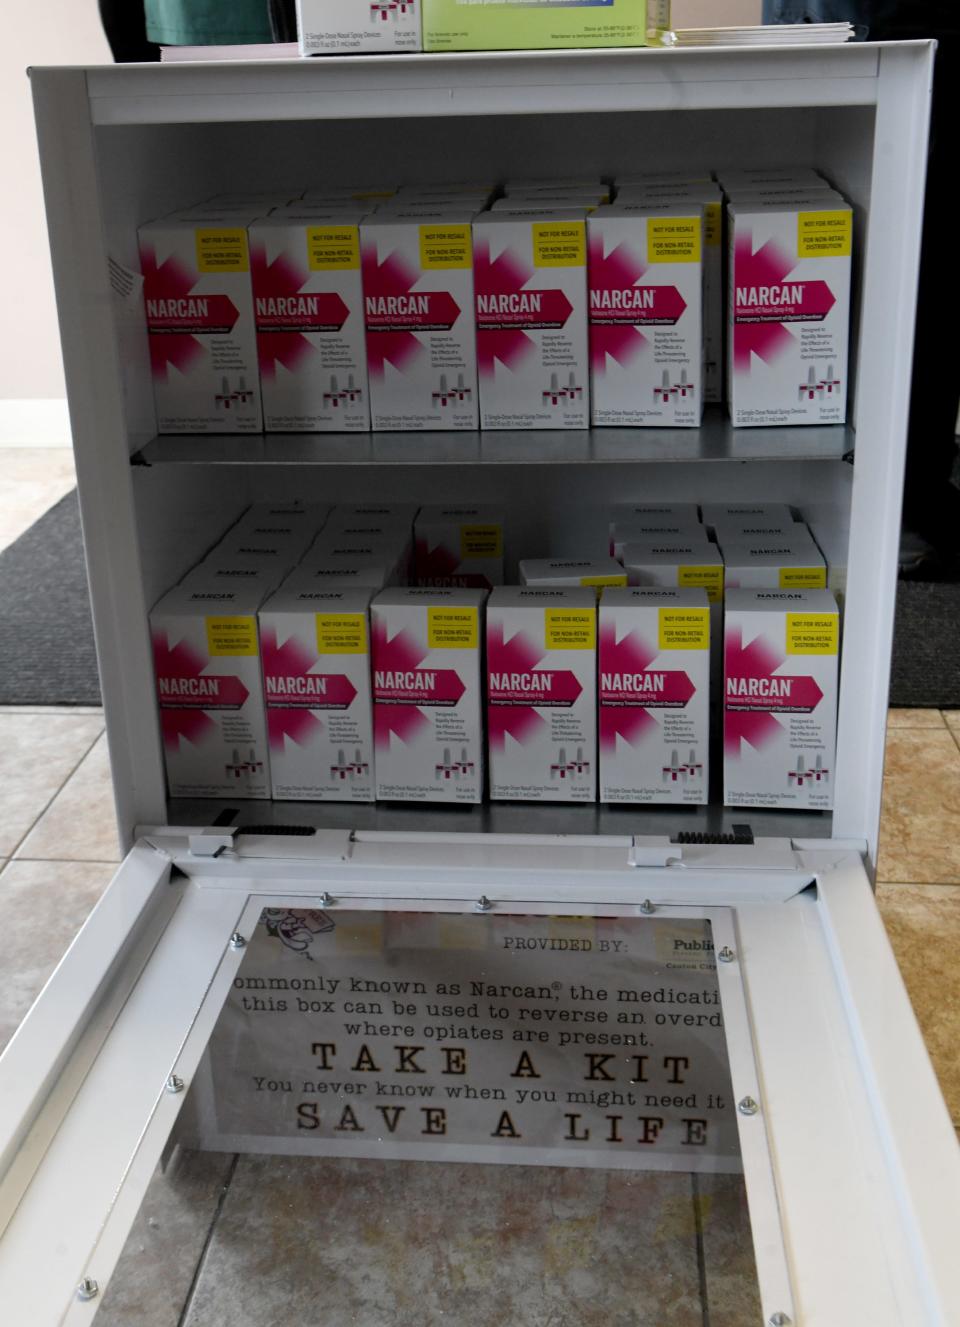 The Stark Community Support Network, though a partnership with Canton City Public Health, has the first repurposed newspaper Narcan distribution box in Ohio.